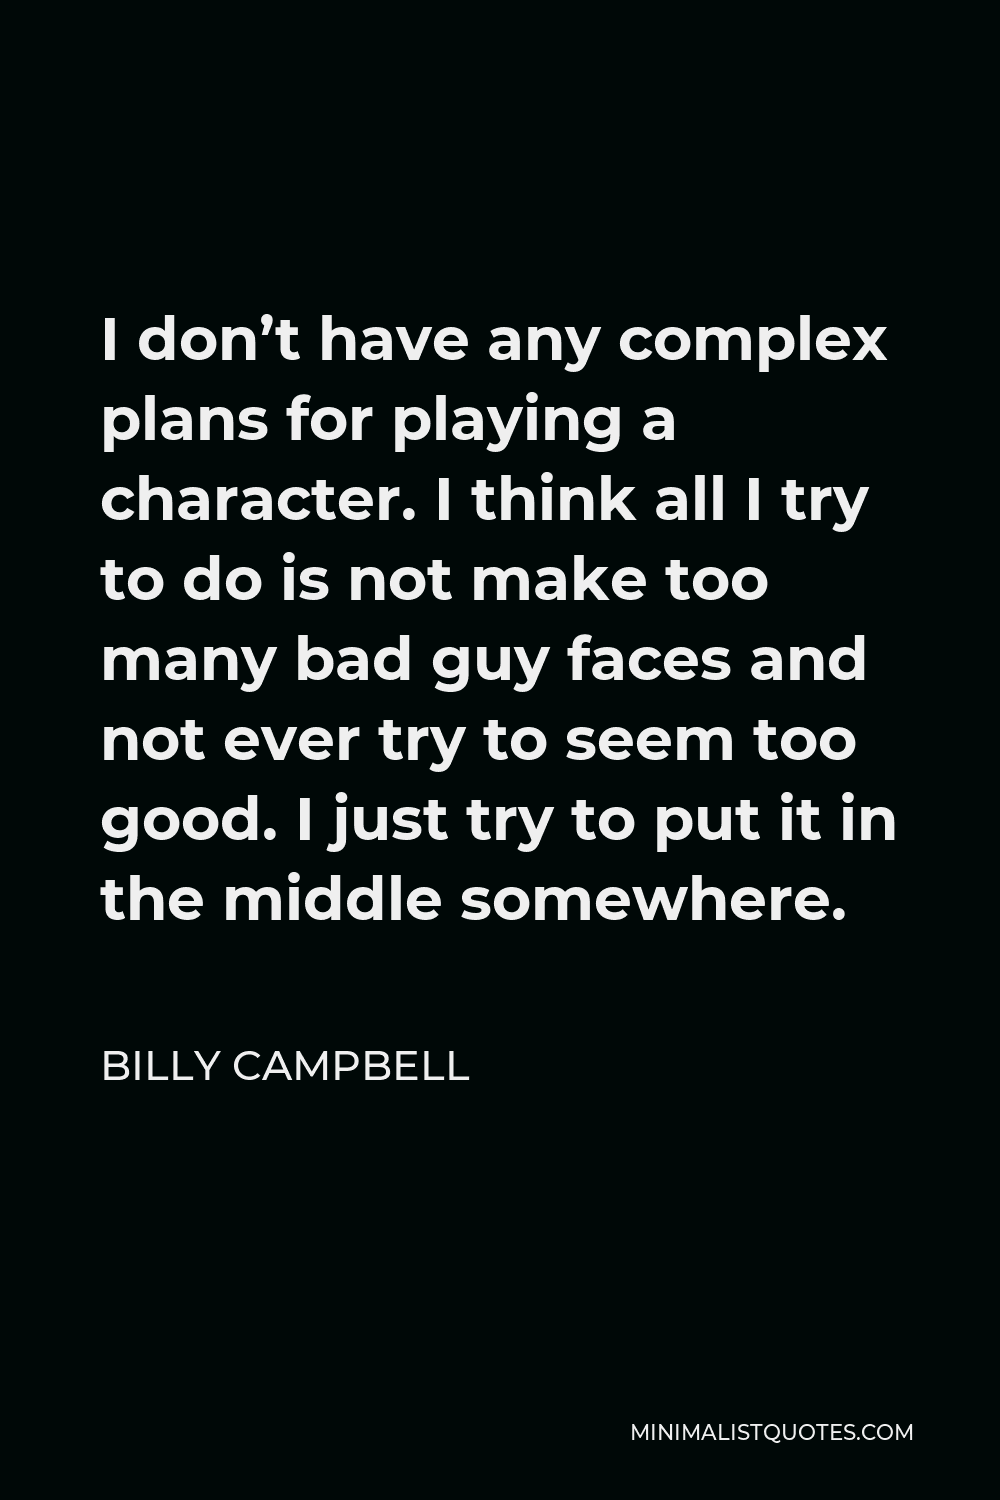 Billy Campbell Quote - I don’t have any complex plans for playing a character. I think all I try to do is not make too many bad guy faces and not ever try to seem too good. I just try to put it in the middle somewhere.